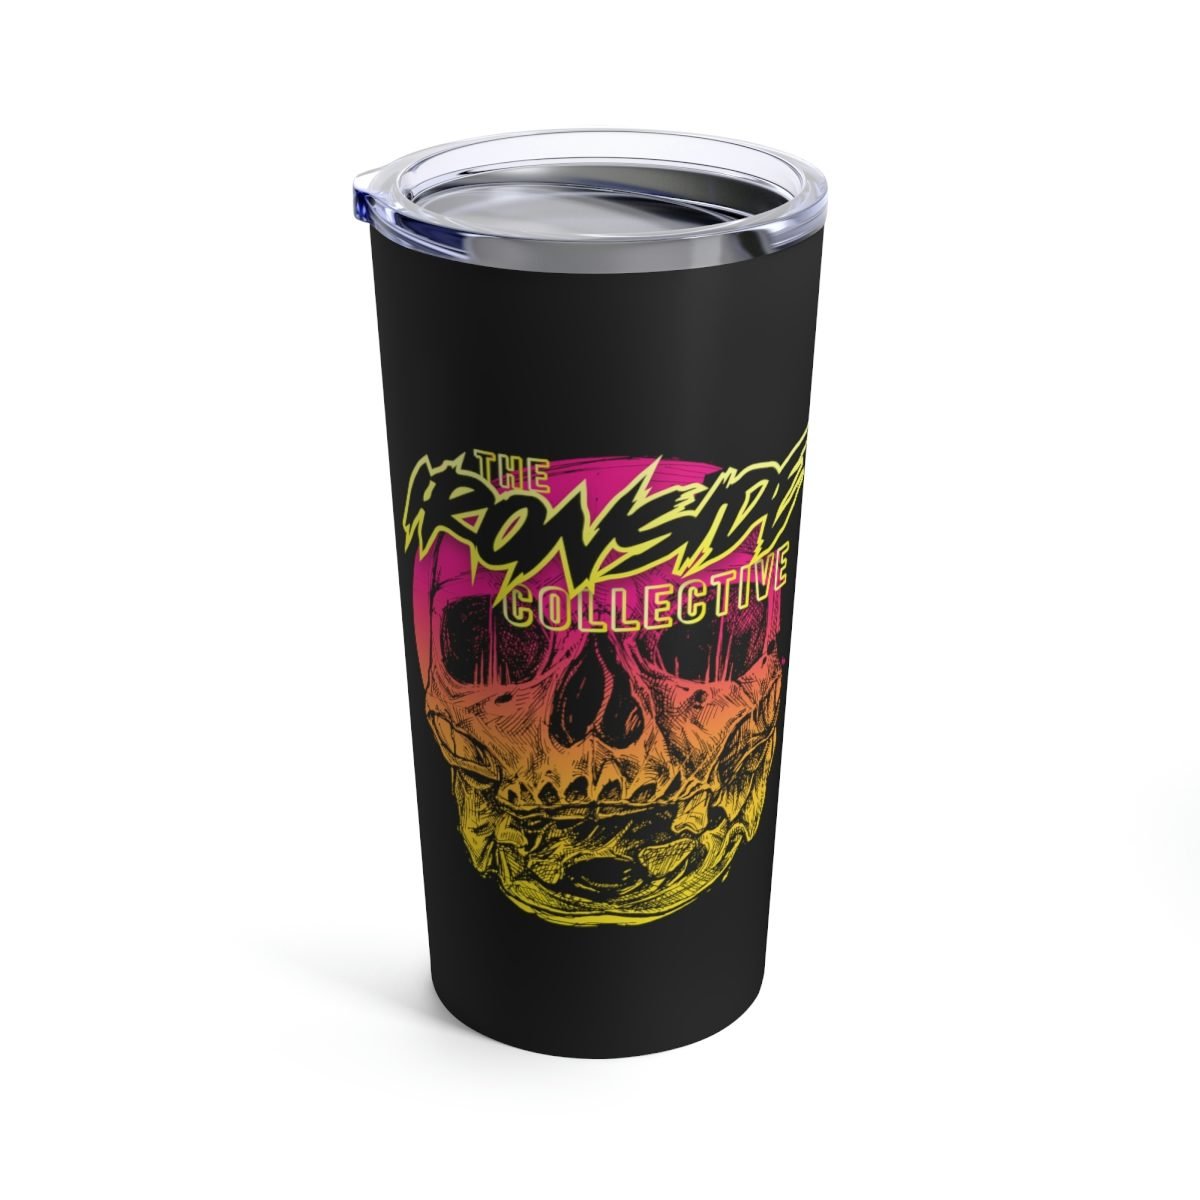 The Ironside Collective (The Charon Collective) 20oz Stainless Steel Tumbler